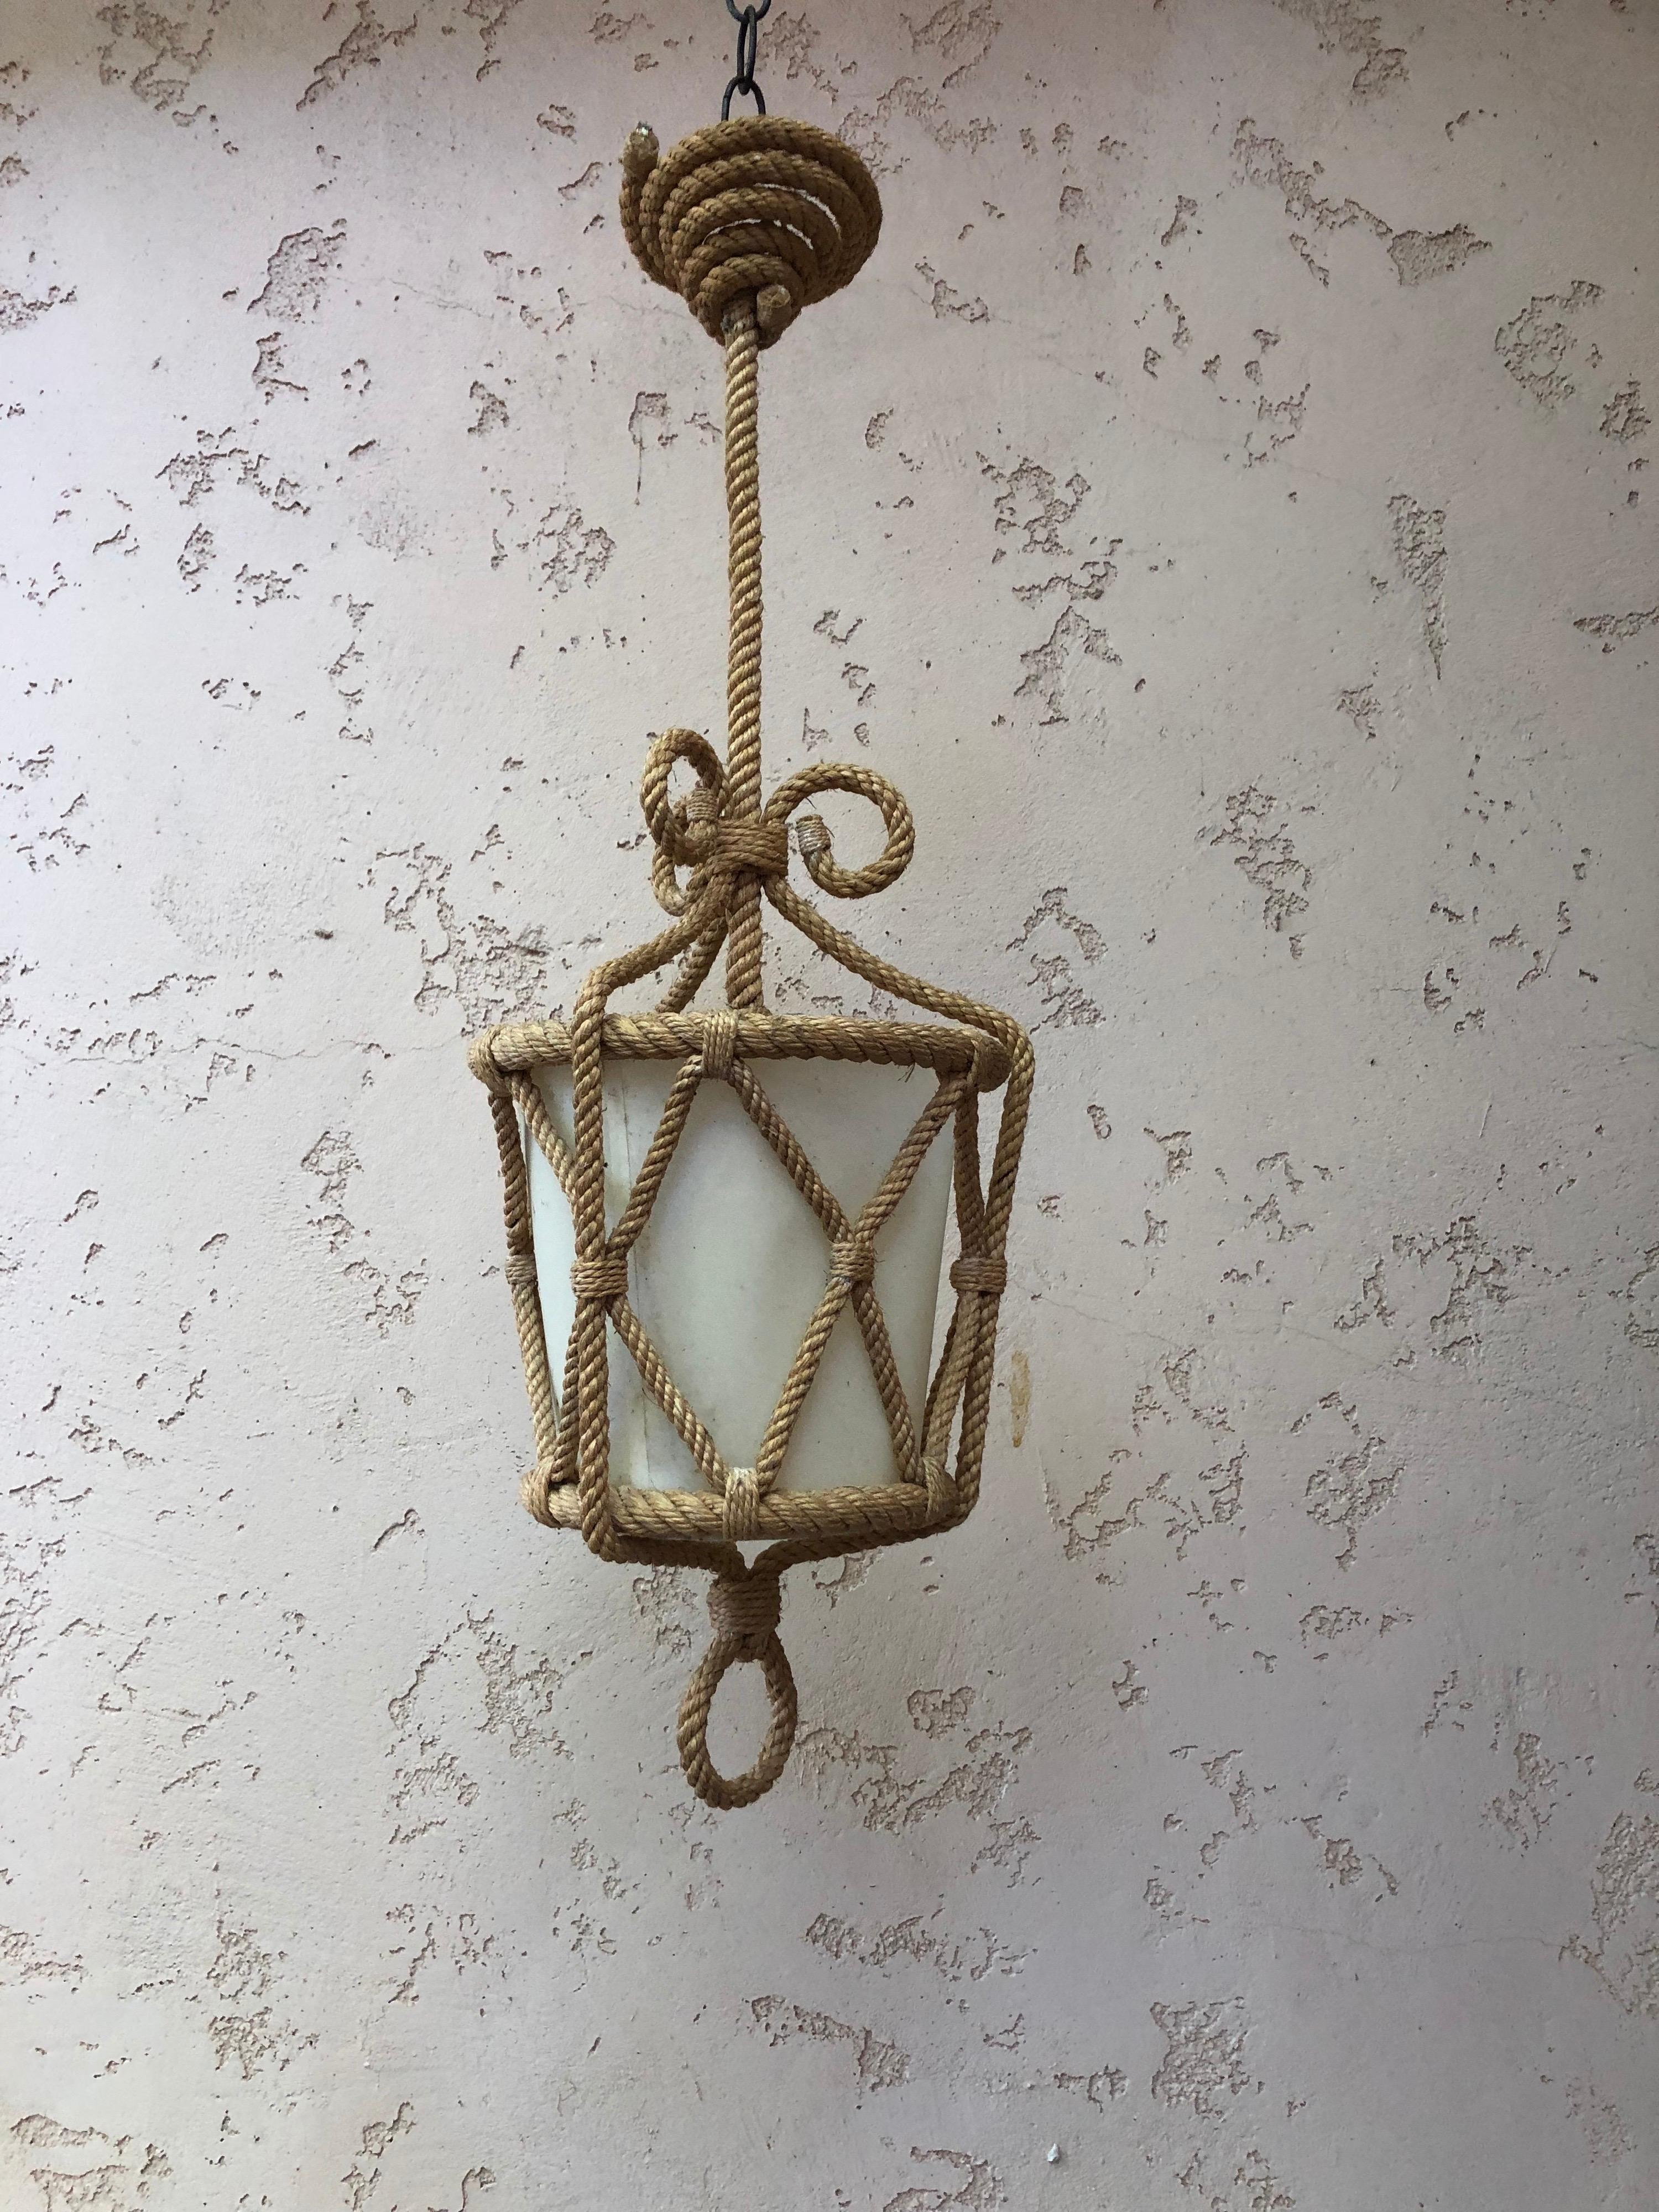 Rare large large rope lantern chandelier pendant Audoux Minet.
Measures: Total height / 29 inches.
Lantern height / 19.5 inches.
Diameter / 9.5 inches.